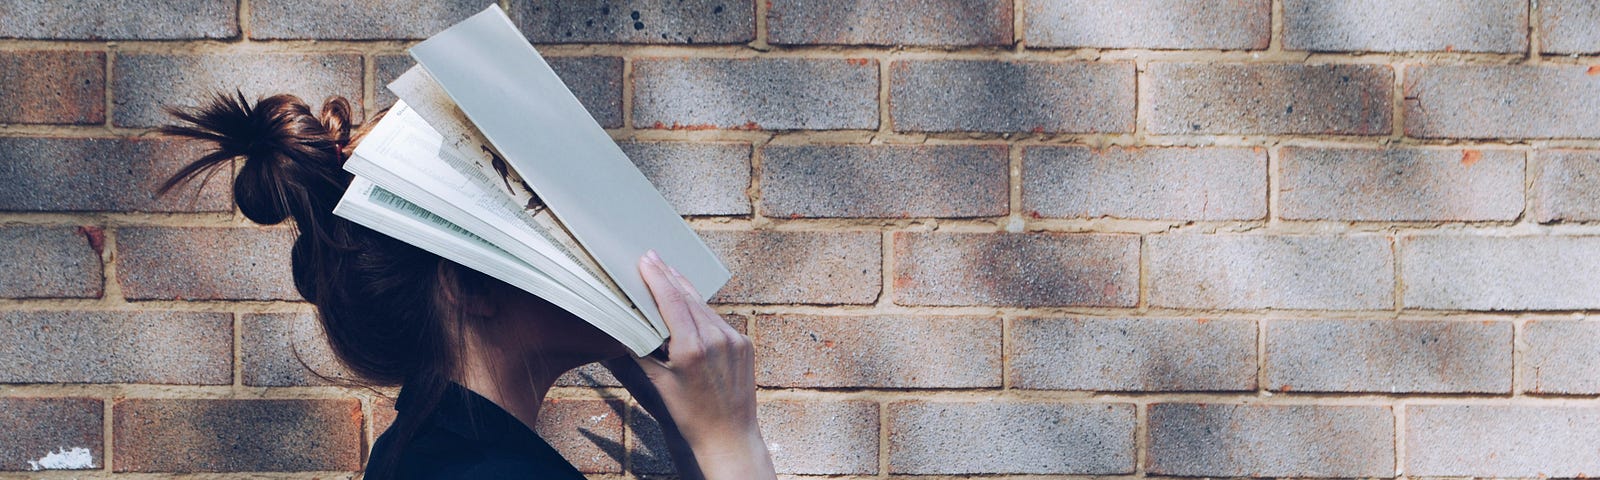 Photo of awoman covering her face with a book against a brick wall